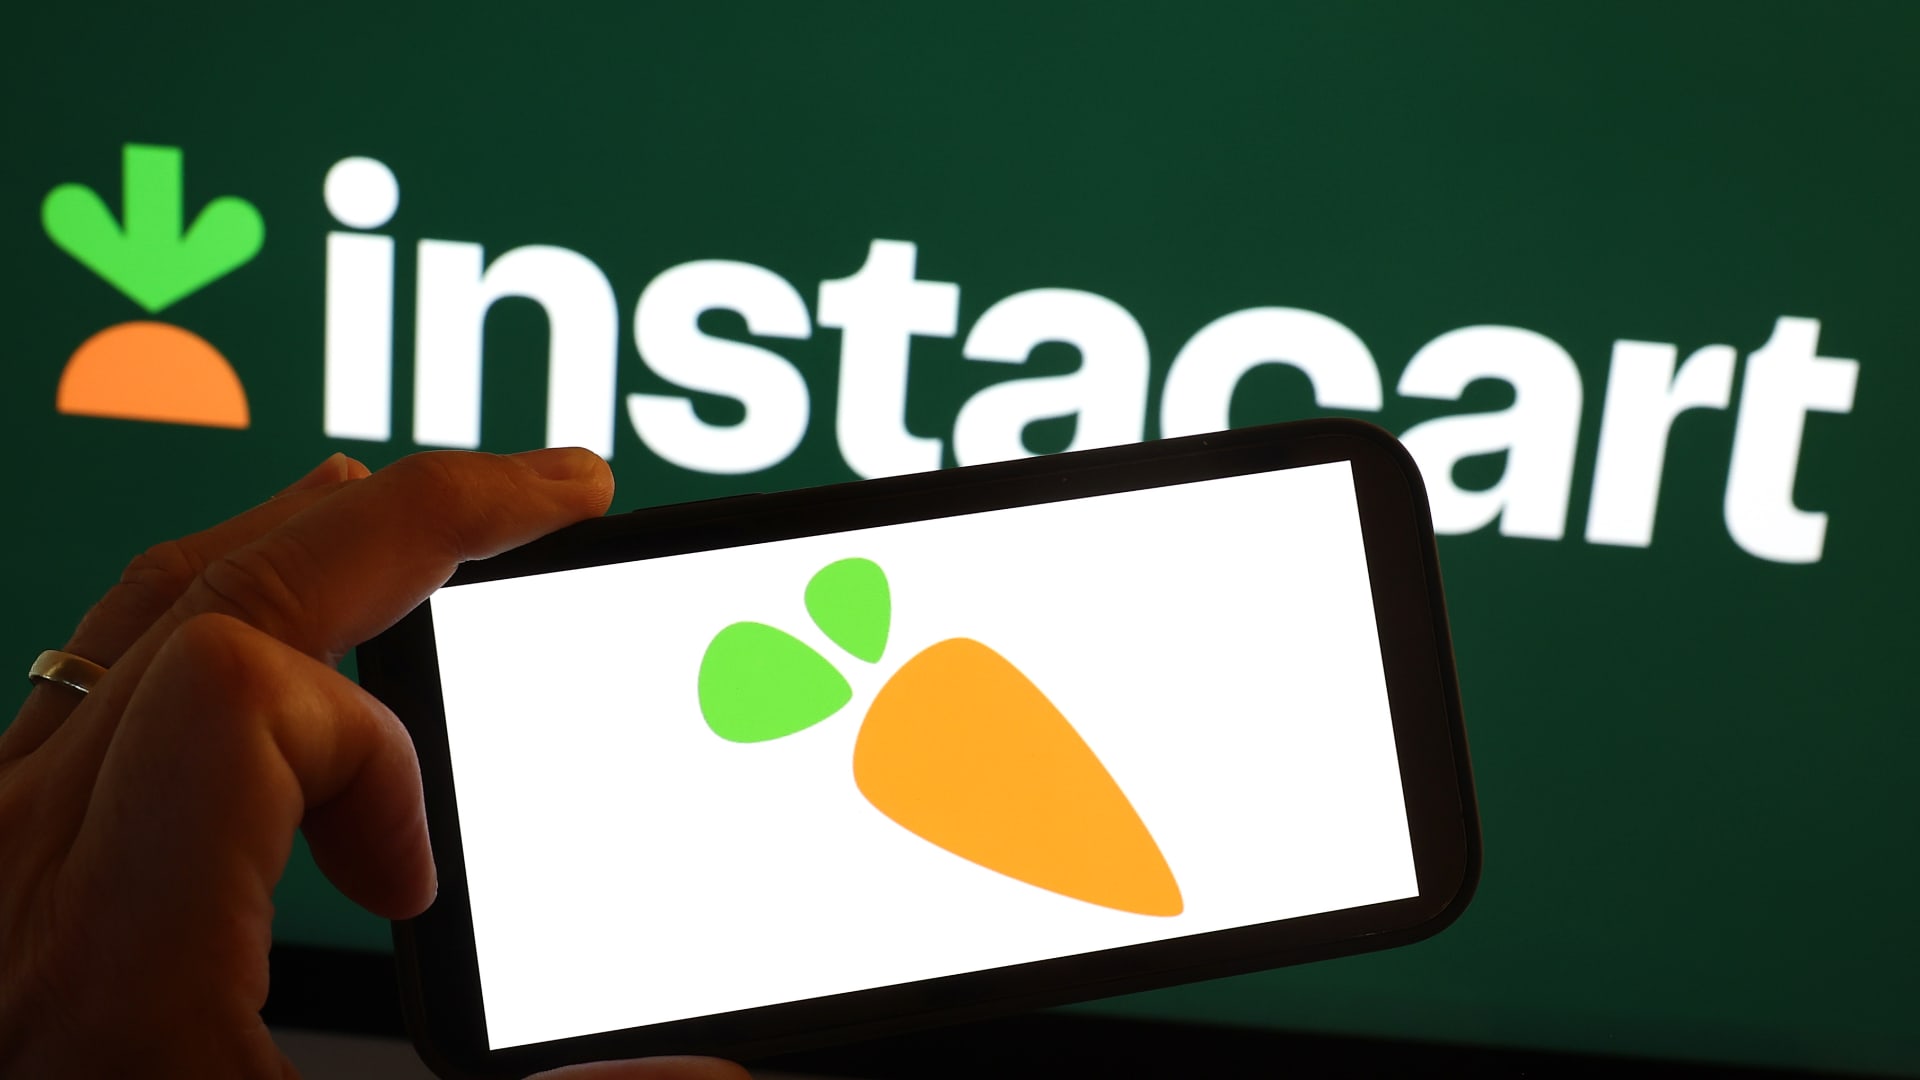 Stocks making the biggest moves noon: Instacart, Steelcase, Klaviyo and more